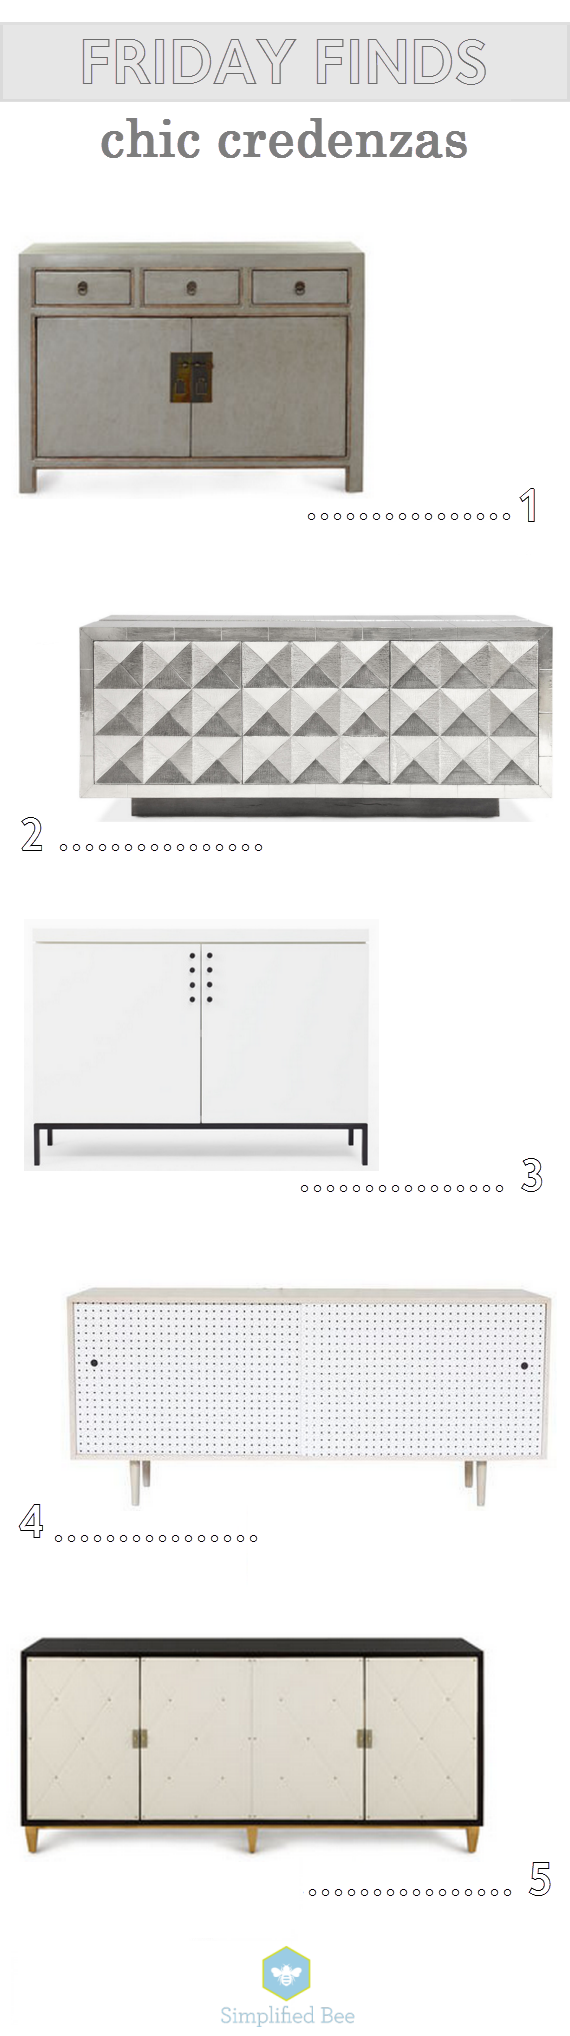 chic credenzas // friday finds // www.simplifiedbee.com